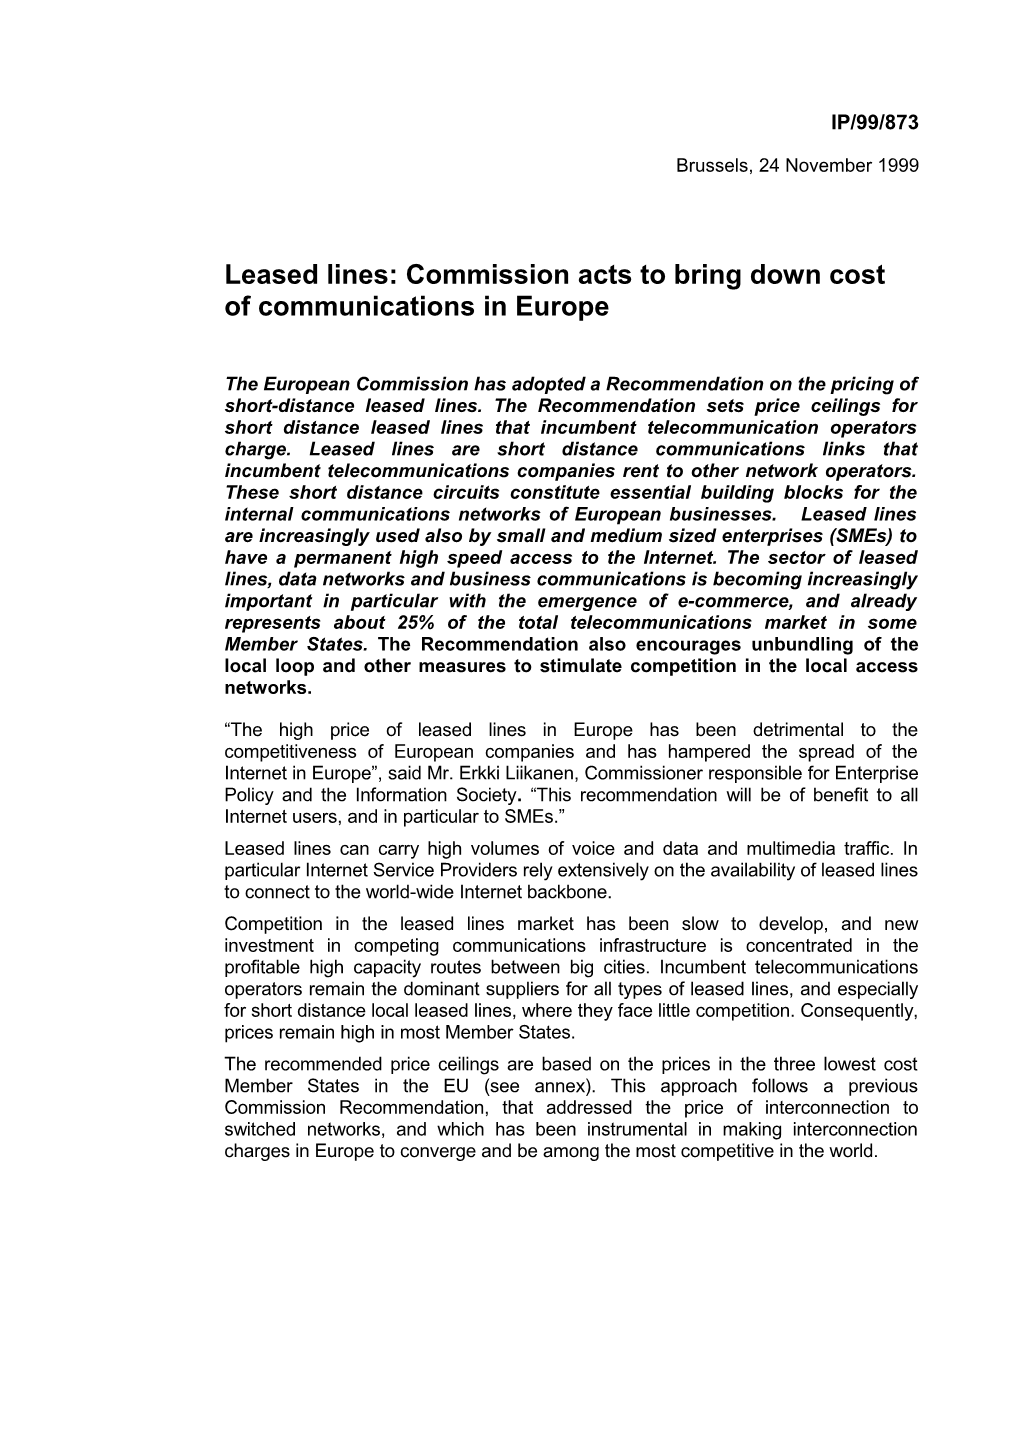 Leased Lines: Commission Acts to Bring Down Cost of Communications in Europe